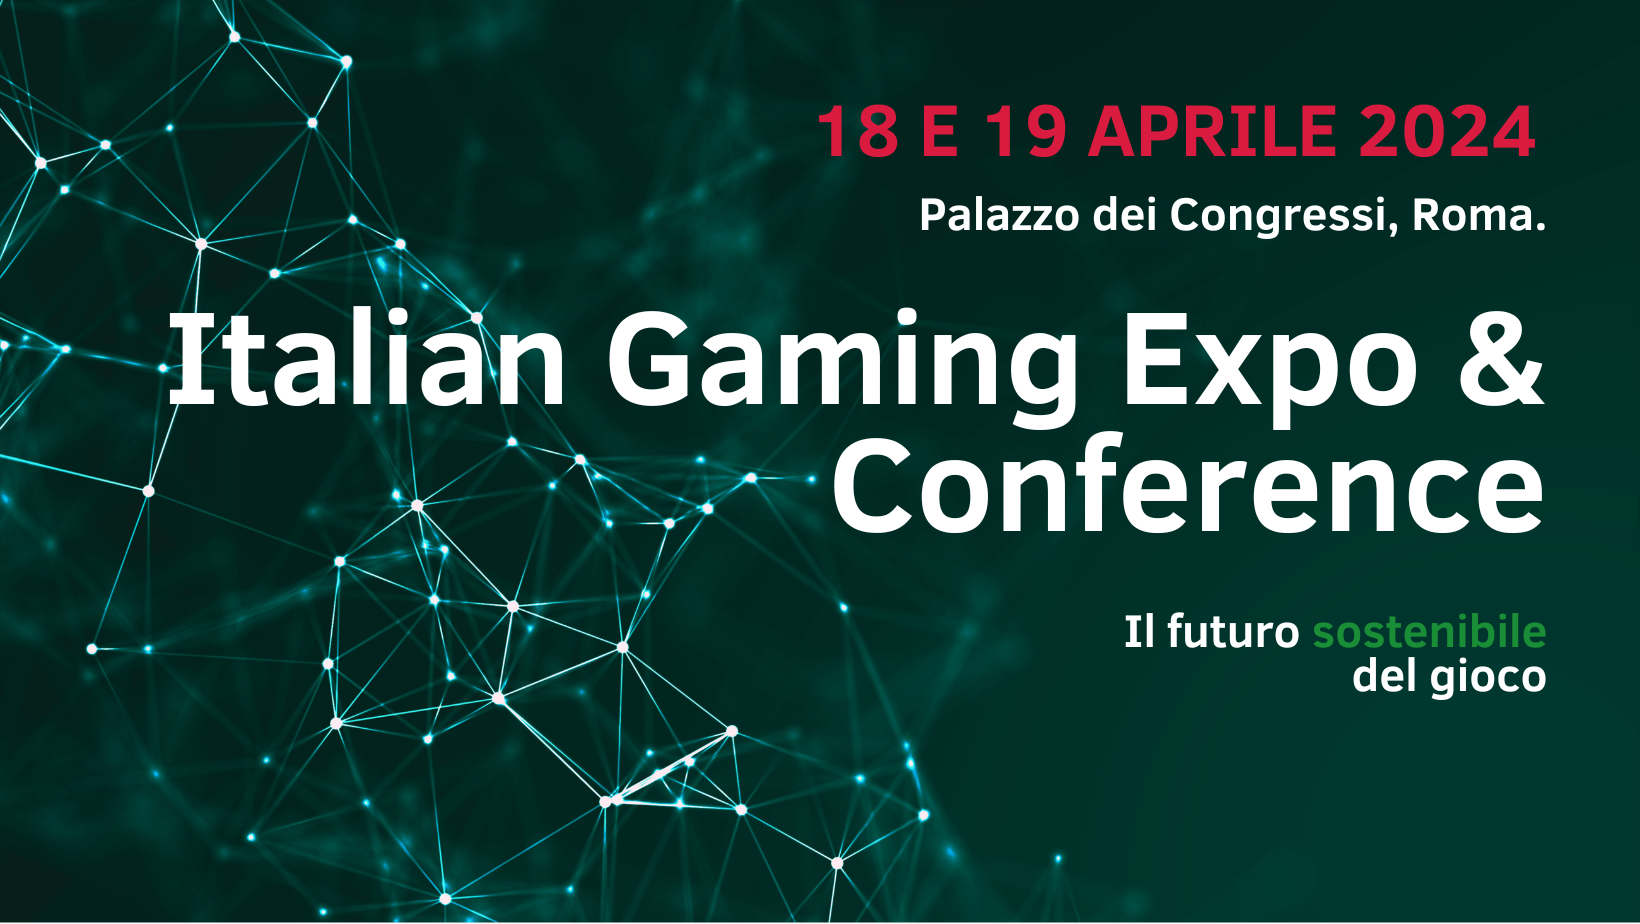 Italian Gaming Expo Conference To Be Held In Rome This April 